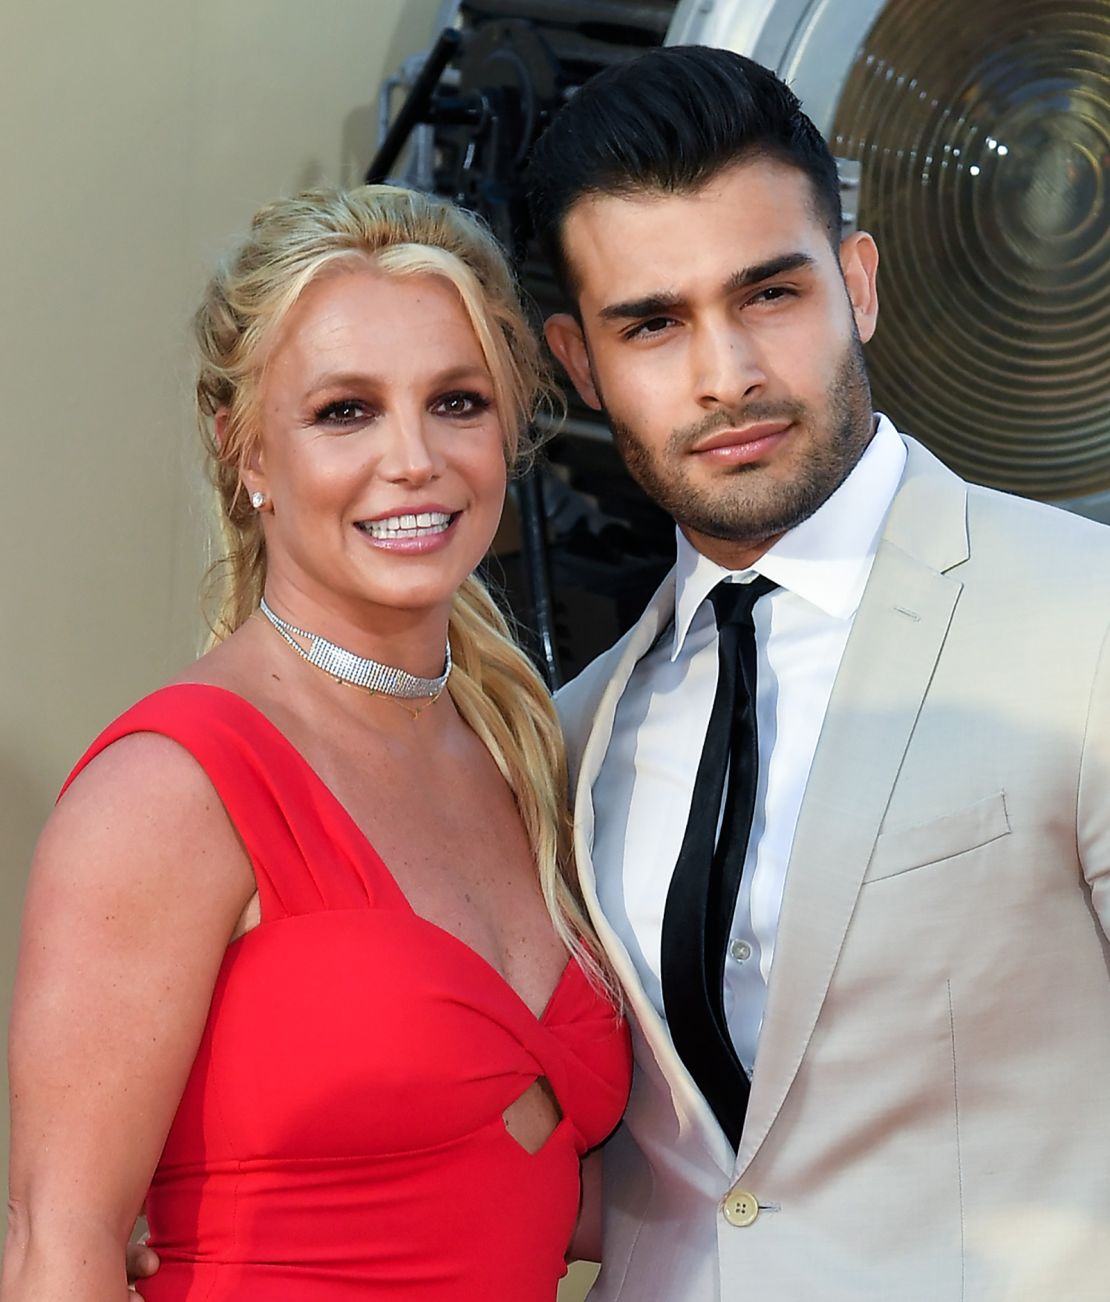 Britney Spears and Sam Asghari at the "Once Upon a Time in Hollywood" film premiere in Los Angeles.